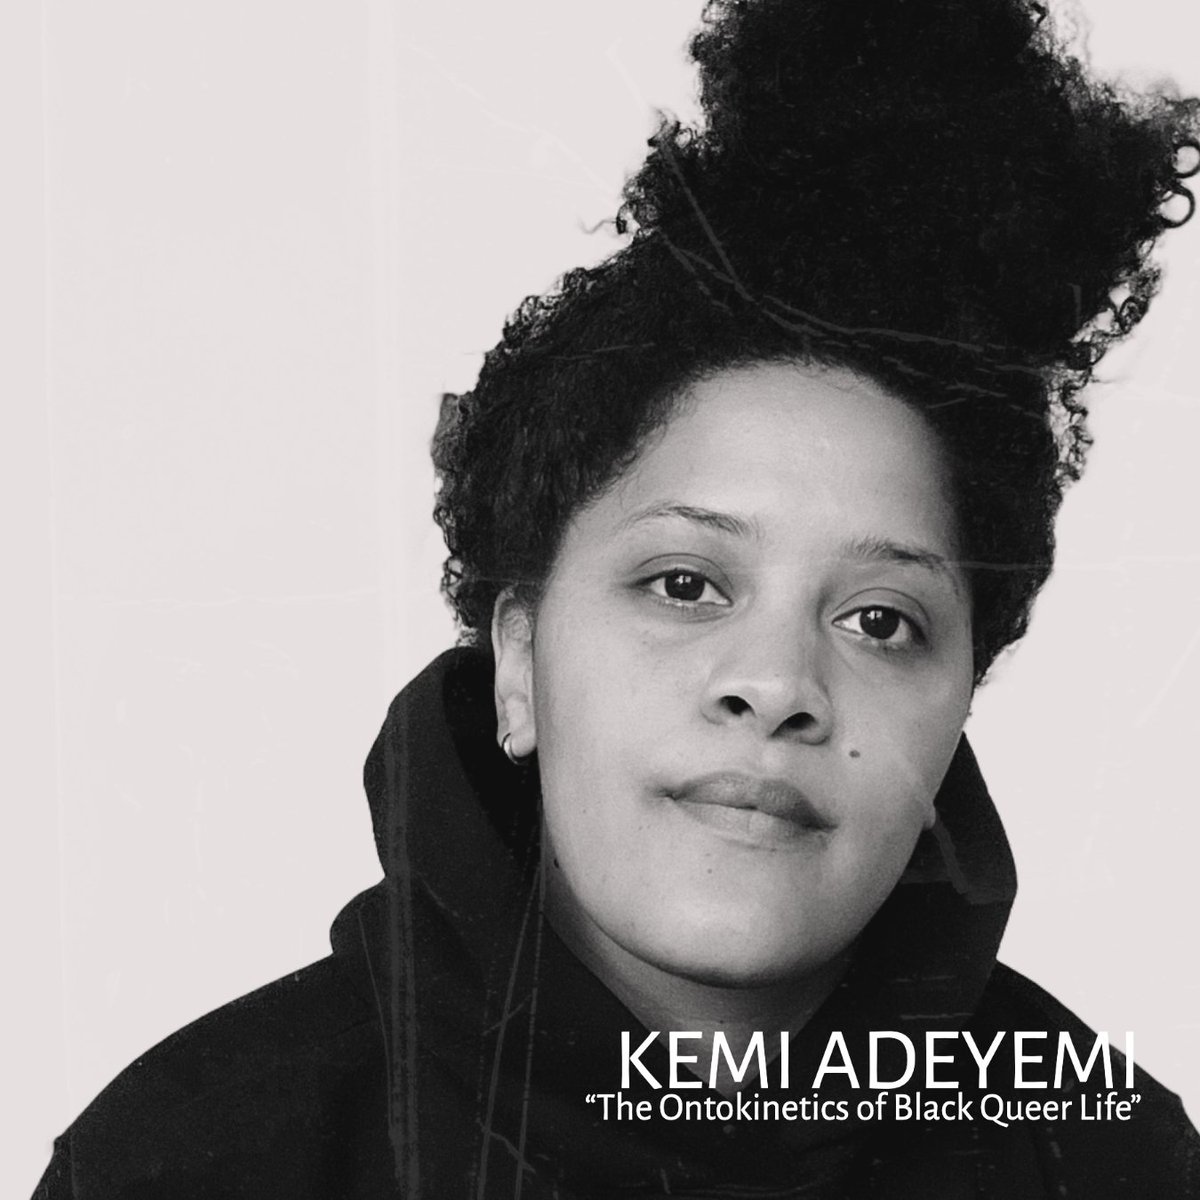 Please meet 2022-2023 #SocietyofScholars Fellow Kemi Adeyemi (@uwgwss) whose project considers the world of black queer apathy, detachment, and disassociation through the language of #ontokinetics (ways of being that are also ways of moving). Read more: bit.ly/3yz8CEJ